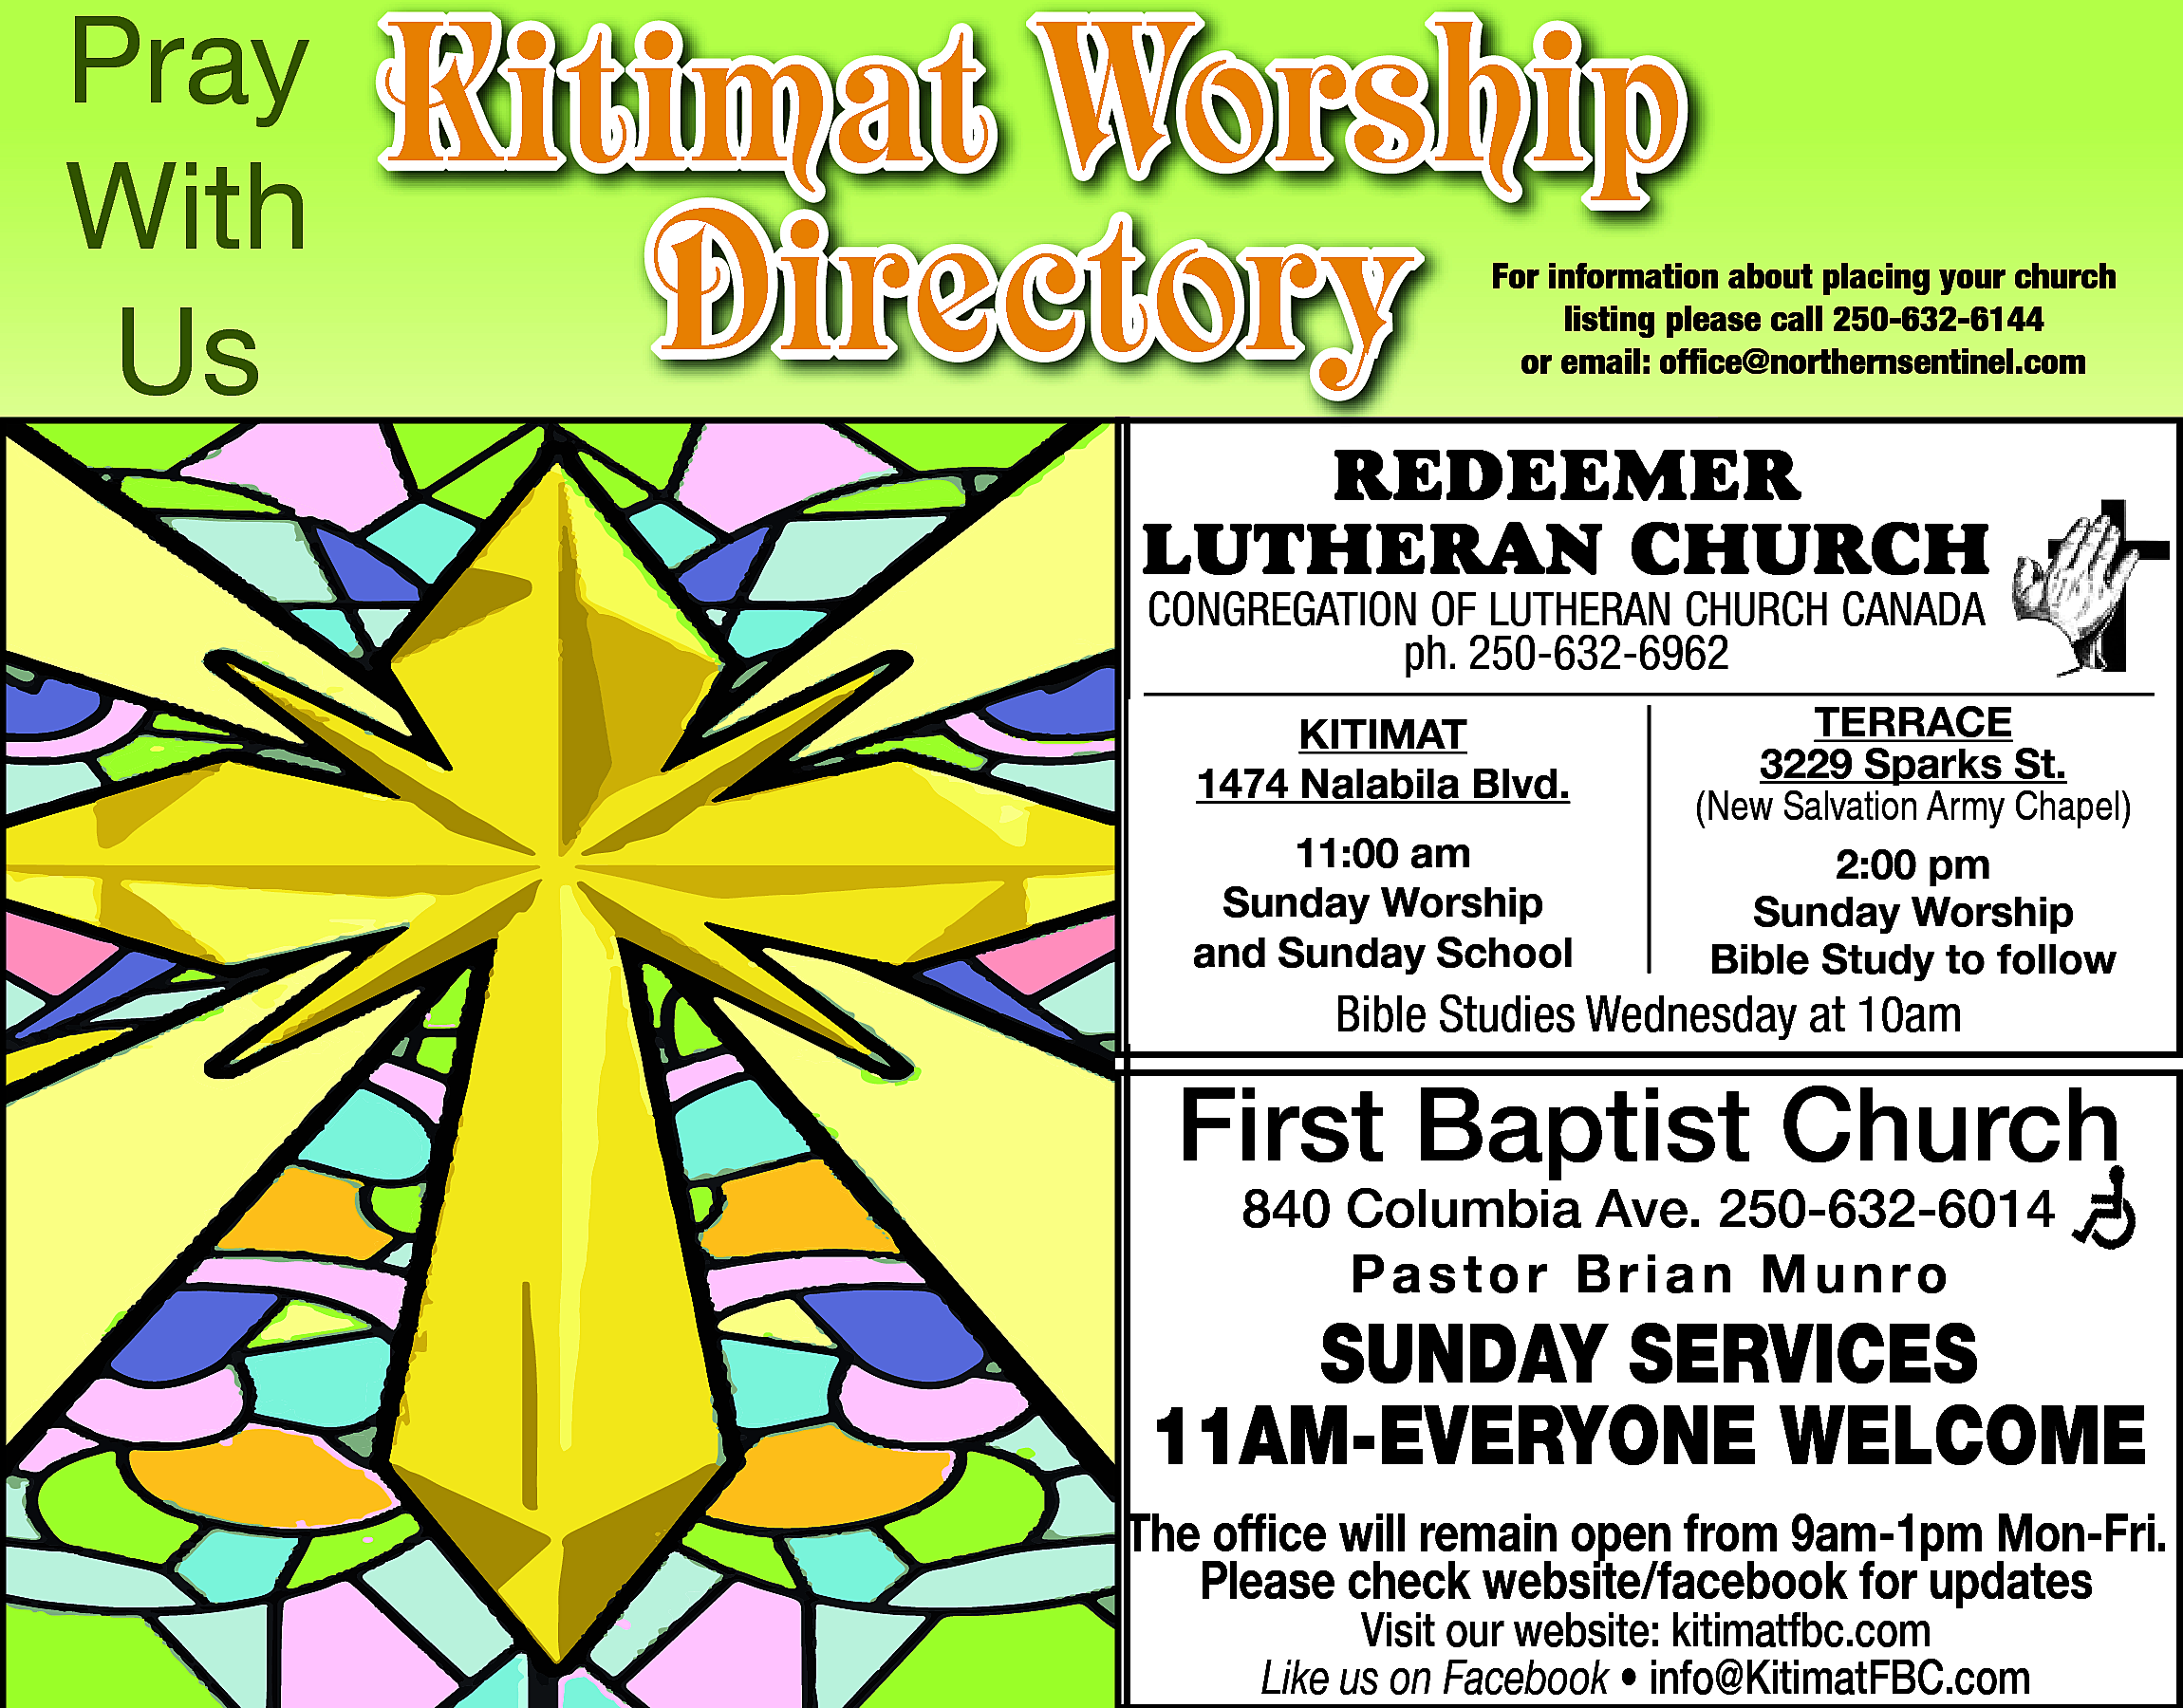 Pray <br>With <br>Us <br> <br>Kitimat  Pray  With  Us    Kitimat Worship  Directory    For information about placing your church  listing please call 250-632-6144  or email: office@northernsentinel.com    RedeemeR  LutheRan ChuRCh  Congregation of Lutheran ChurCh Canada  ph. 250-632-6962  ph. 250-632-6962  • Pastor Alan Visser  Kitimat  Kitimat  1474 Nalabila Blvd.  1474 Nalabila Blvd.  11:00 am  11:00  am  Sunday Worship  Sunday  Worship  and Sunday  School    terrace  3229  Sparks St.  terrace  (New Salvation Army Chapel)  3229 Sparks St.  2:00 pm  (NewSunday  SalvationWorship  Army Chapel)  Bible Study to follow    Bible  on Facebook  BibleStudies  StudiesAvailable  Wednesday  at 10am    First Baptist Church  840 Columbia Ave. 250-632-6014  Pastor Brian Munro    SUNDAY SERVICES  11AM-EVERYONE WELCOME  The office will remain open from 9am-1pm Mon-Fri.  Please check website/facebook for updates  Visit our website: kitimatfbc.com  Like us on Facebook • info@KitimatFBC.com    